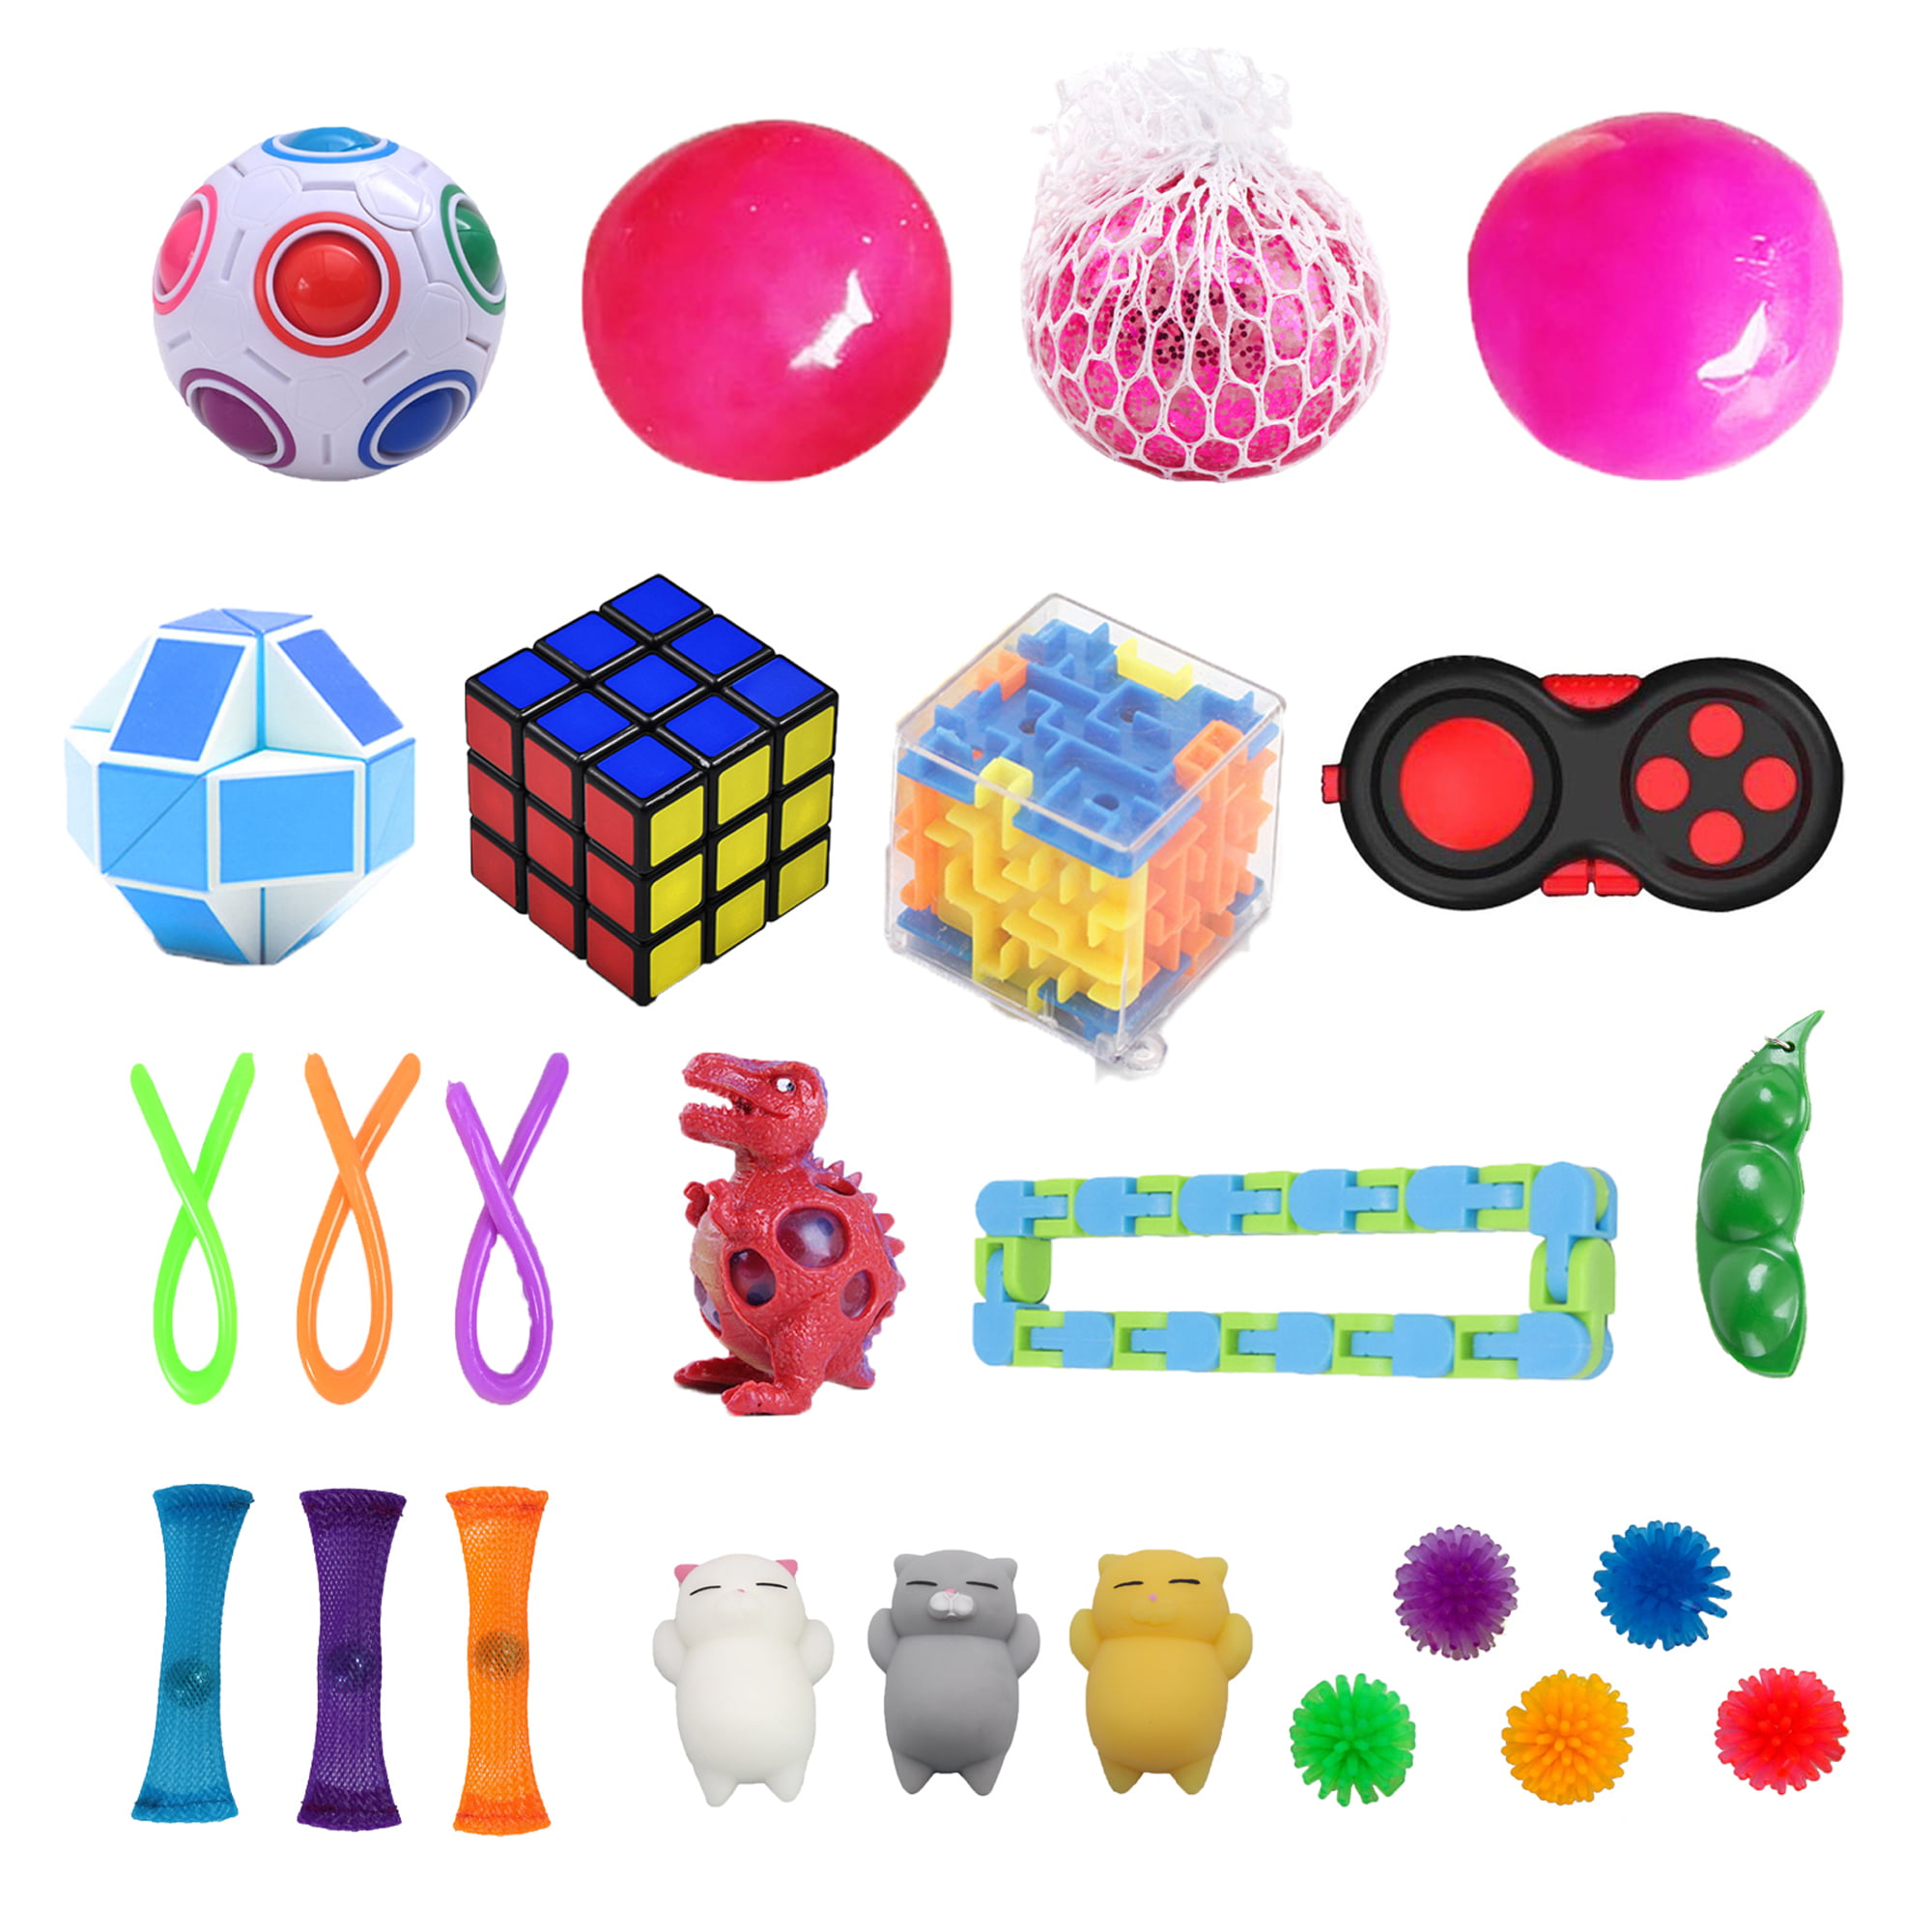 12 Pieces Sensory Fidget Toy Relieves Stress and Anxiety Fidget Pad Flippy Chain Fidget Mesh Fidget Keychain Fidget Dice Wacky Track Magic Cube Ball Bean Toys Assortment for Teens and Adults 